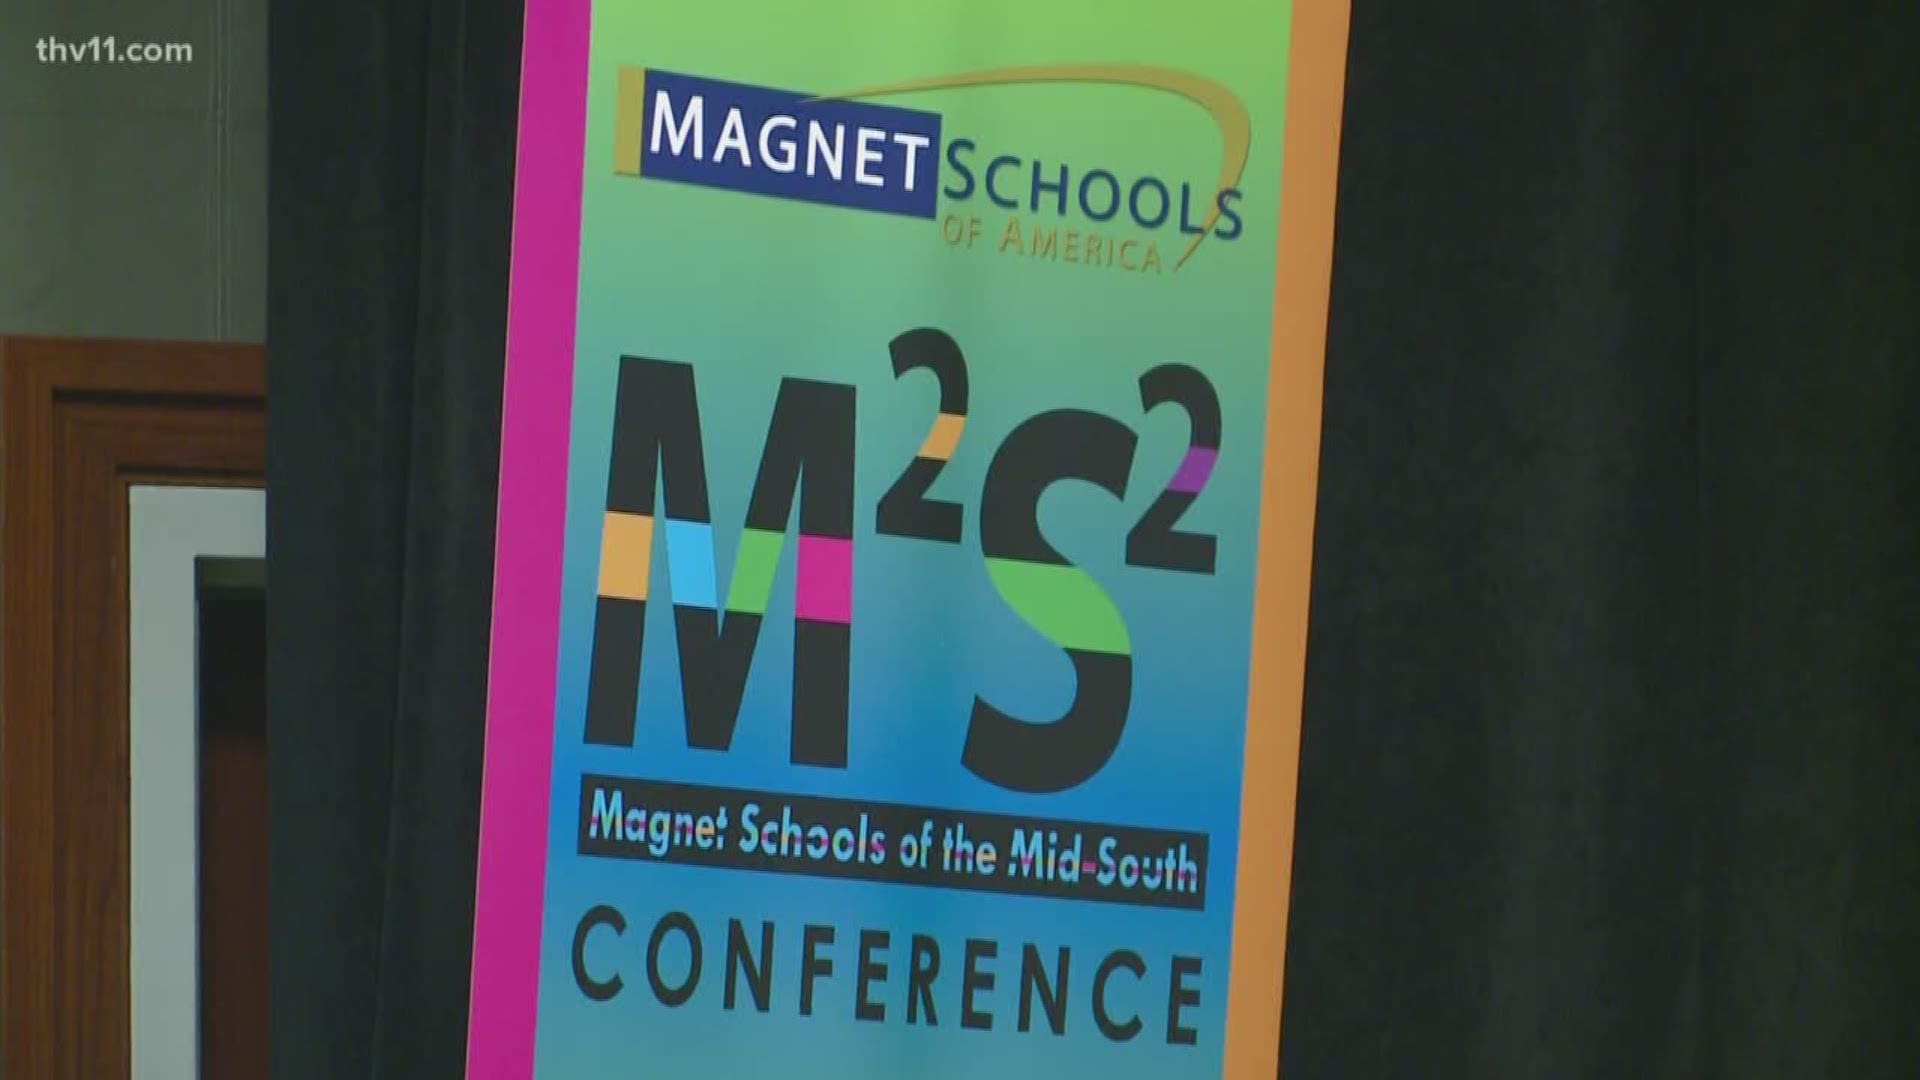 Little Rock is playing host to the 'Magnet Schools of the Mid-South' conference.